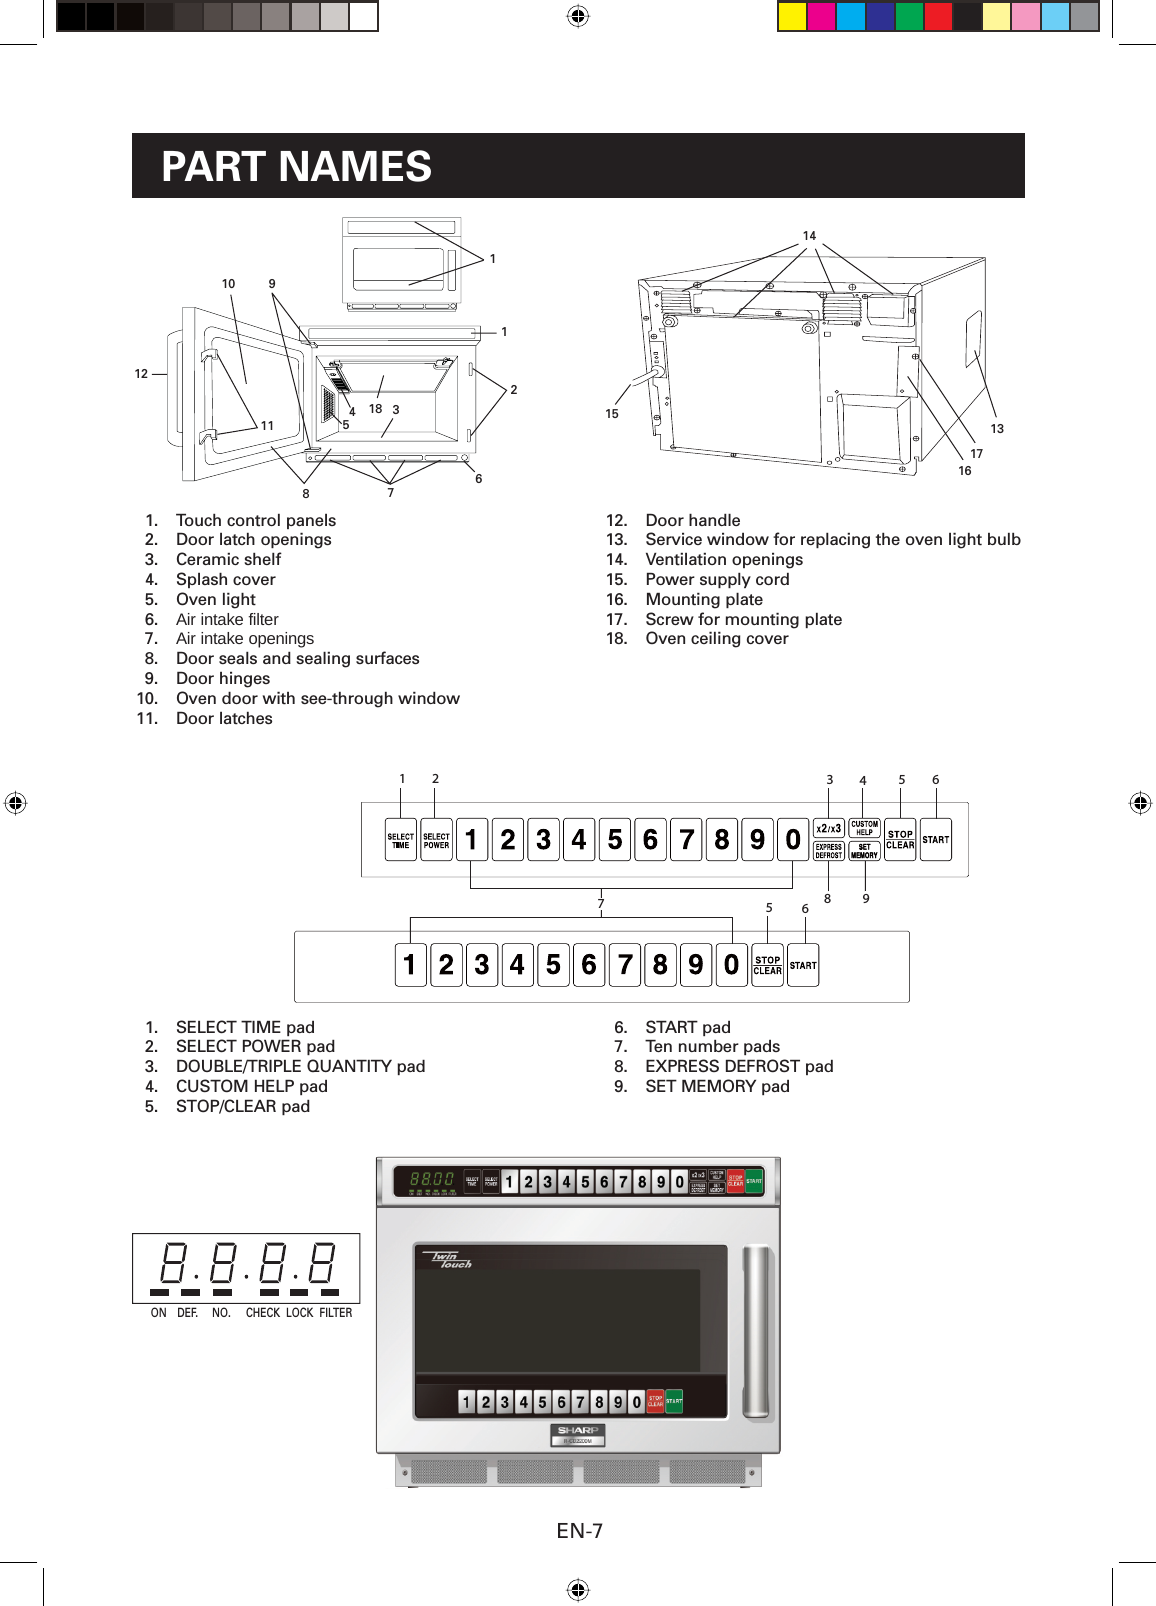 EN-7PART NAMES  1.  Touch control panels  2.  Door latch openings 3.  Ceramic shelf 4.  Splash cover 5.  Oven light  6.  Air intake filter  7.  Air intake openings  8.  Door seals and sealing surfaces 9.  Door hinges 10.  Oven door with see-through window 11.  Door latches 12.  Door handle 13.  Service window for replacing the oven light bulb 14.  Ventilation openings 15.  Power supply cord 16.  Mounting plate 17.  Screw for mounting plate 18.  Oven ceiling cover  1.  SELECT TIME pad  2.  SELECT POWER pad   3.  DOUBLE/TRIPLE QUANTITY pad  4.  CUSTOM HELP pad 5.  STOP/CLEAR pad 6.  START pad  7.  Ten number pads  8.  EXPRESS DEFROST pad  9.  SET MEMORY pad12 3456789561210 91127811 5418 36141713ON DEF. NO. CHECK LOCK FILTER1516